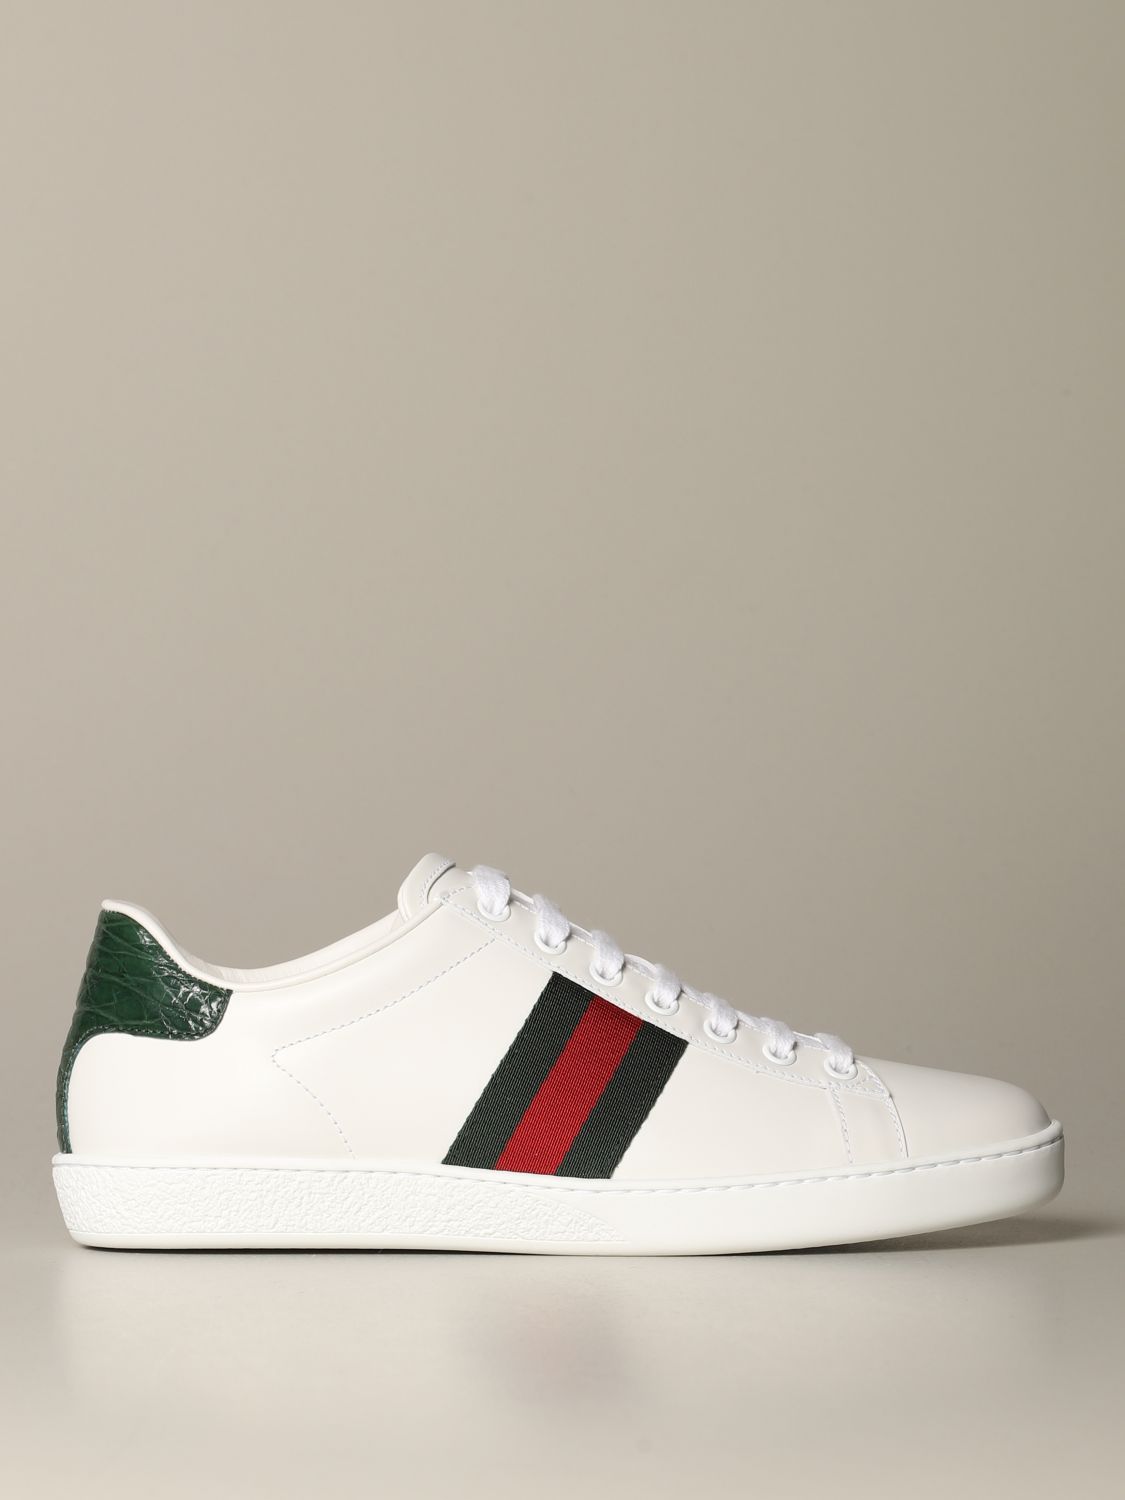 GUCCI: Ace leather sneakers with Web bands - White | Gucci sneakers ...